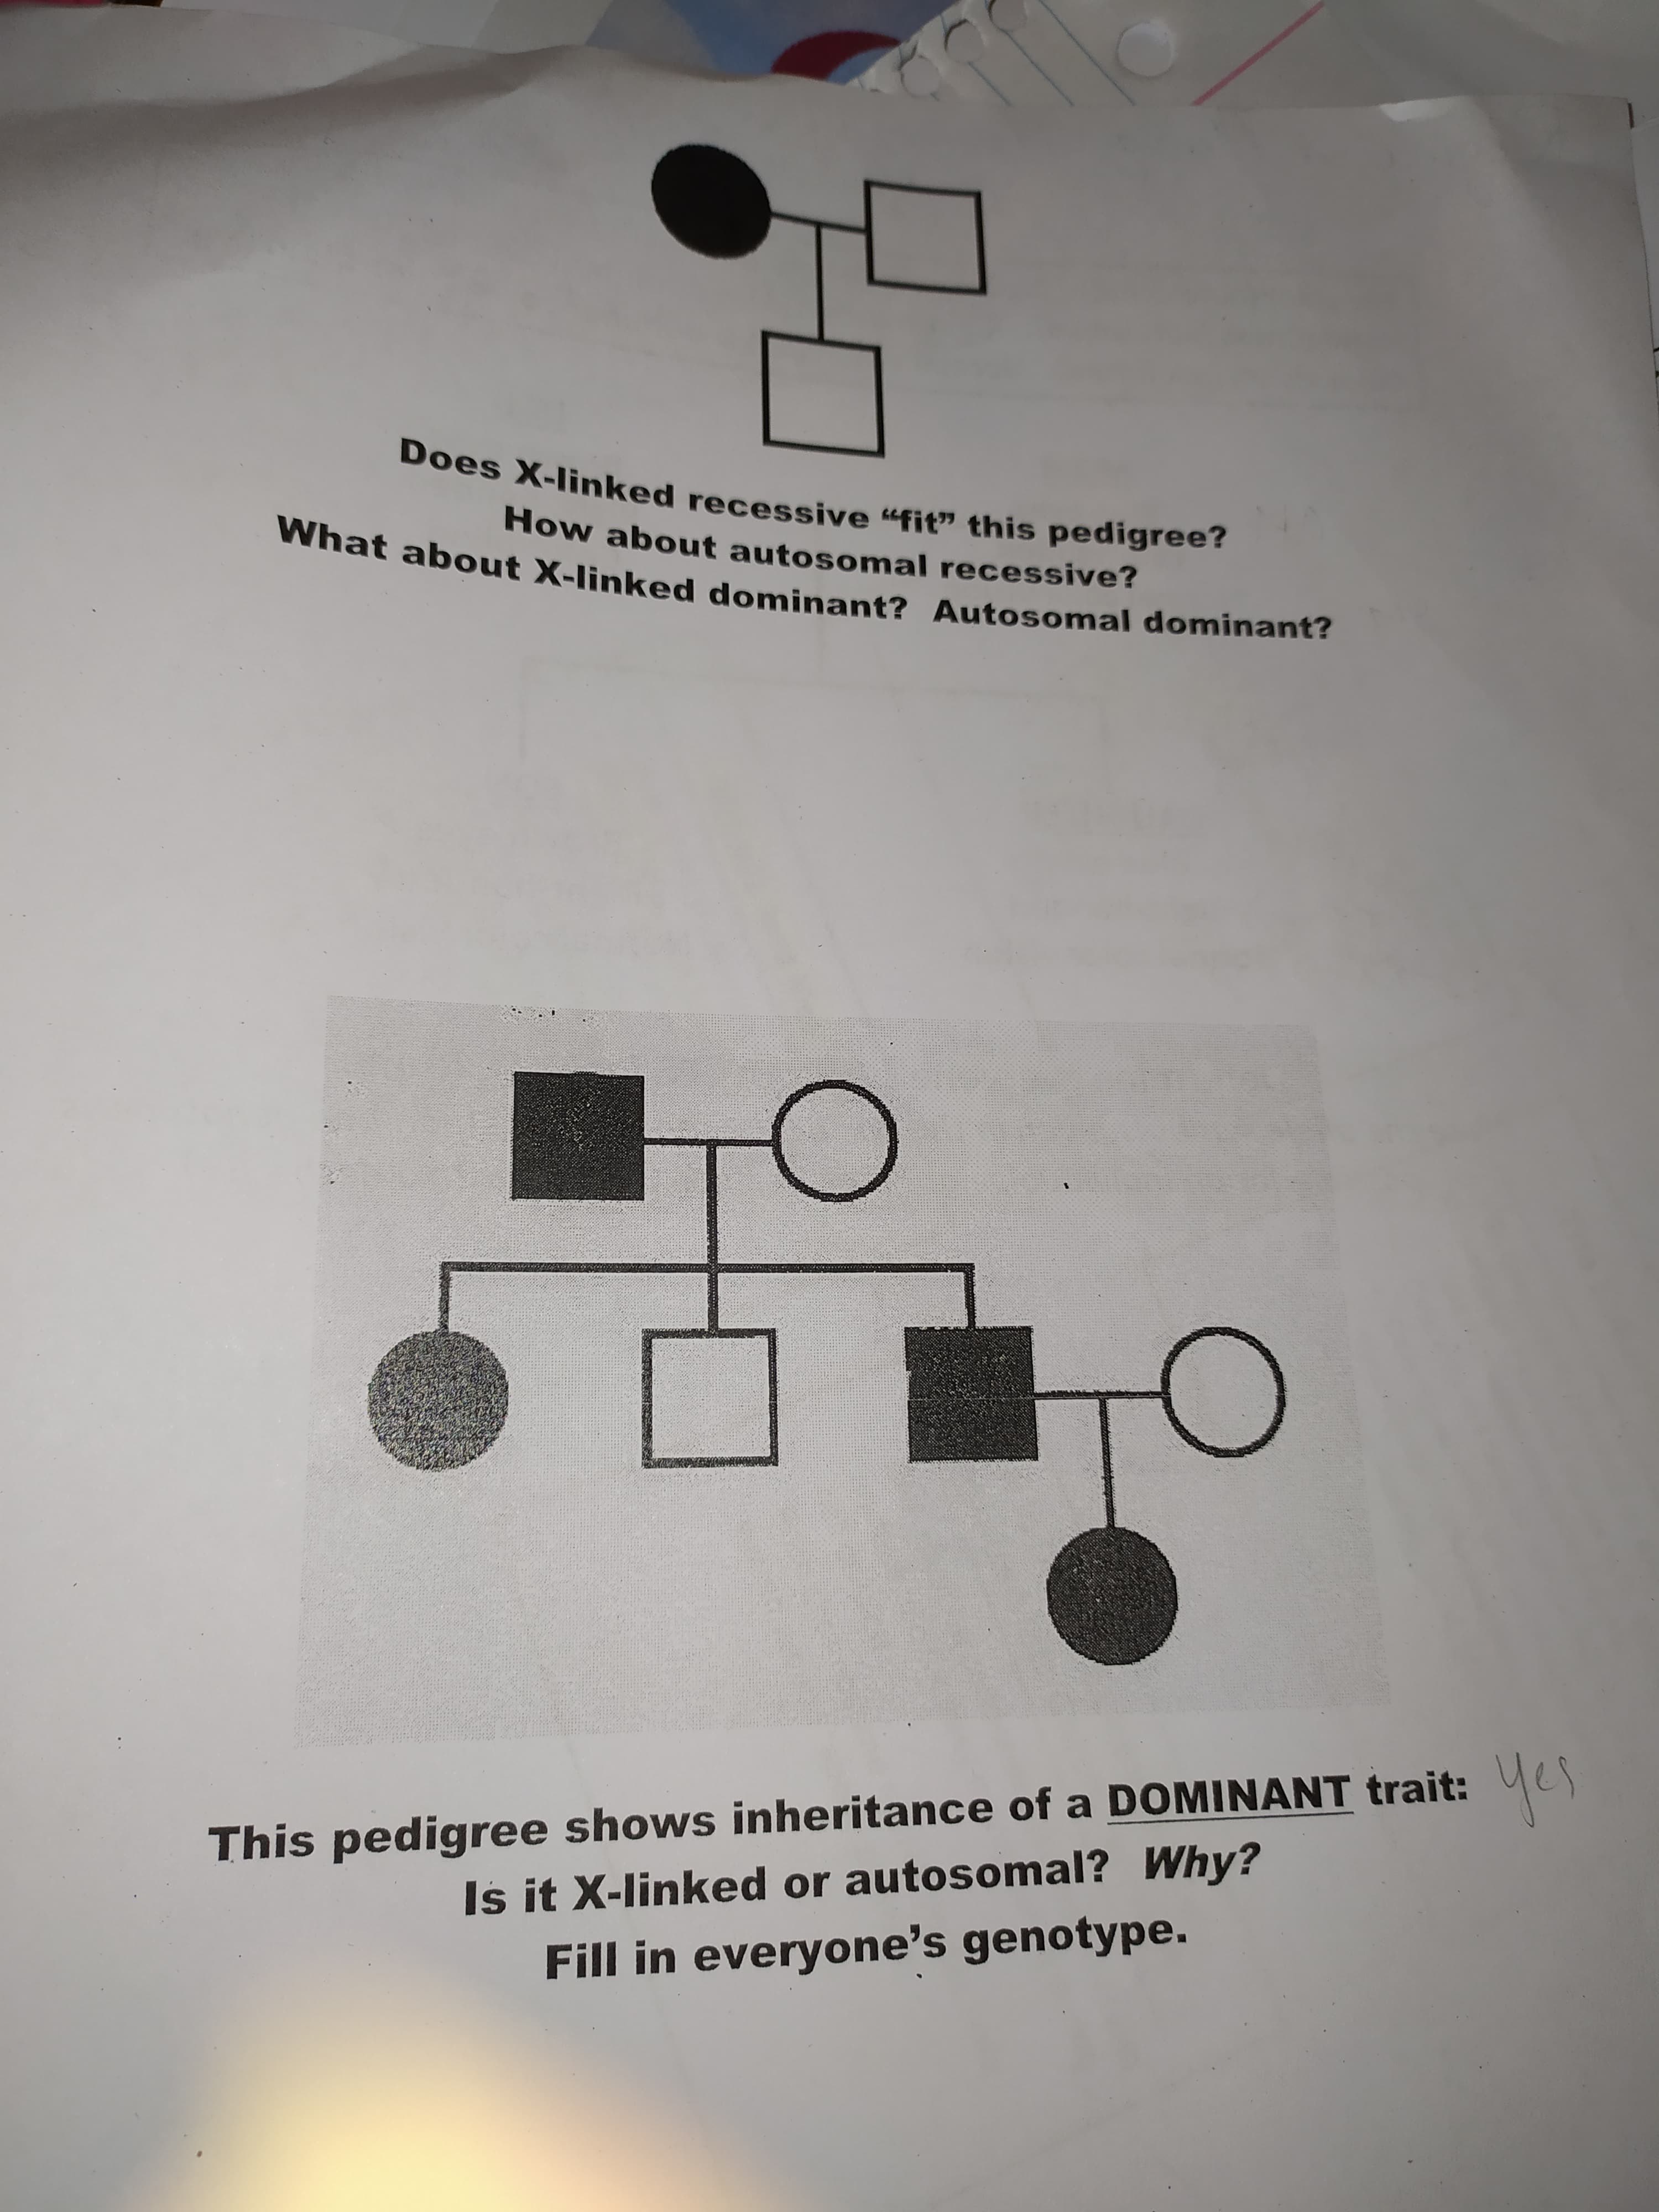 Does X-linked recessive "fit" this pedigree?
How about autosomal recessive?
What about X-linked dominant? Autosomal dominant?
yes
This pedigree shows inheritance of a DOMINANT trait:
Is it X-linked or autosomal? Why?
Fill in everyone's genotype.
